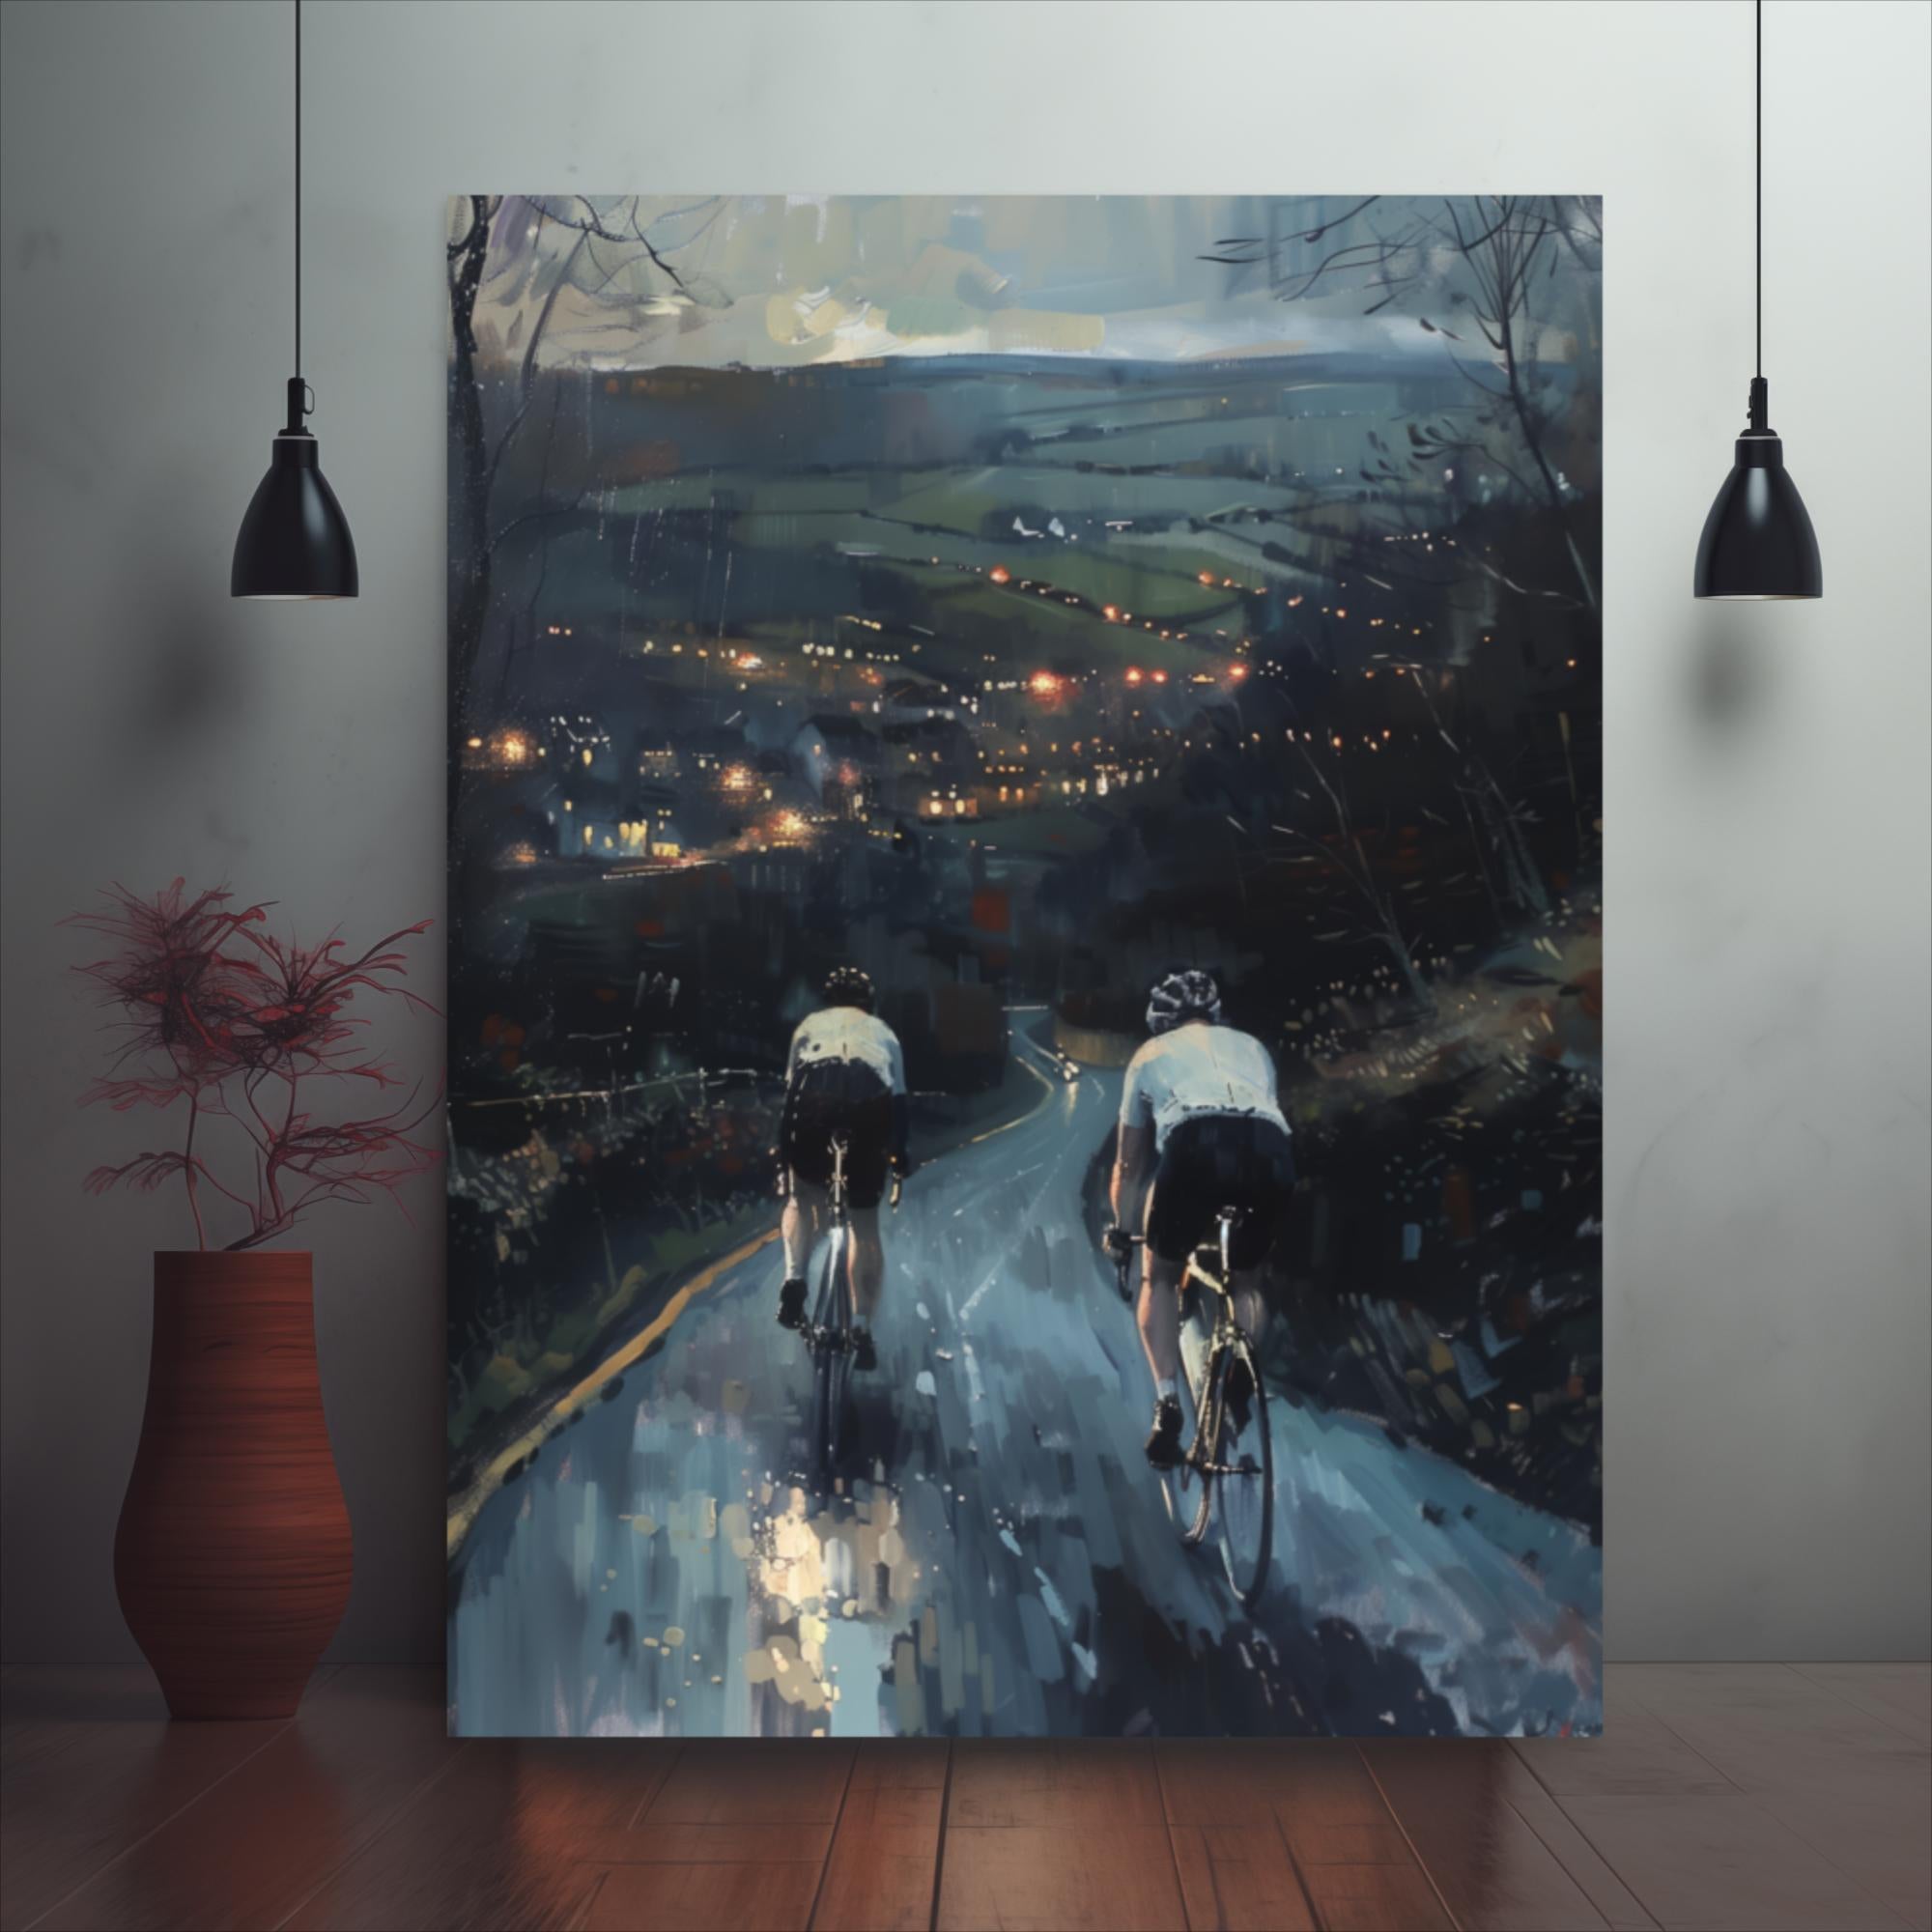 The Day's End on Two Wheels Framed poster